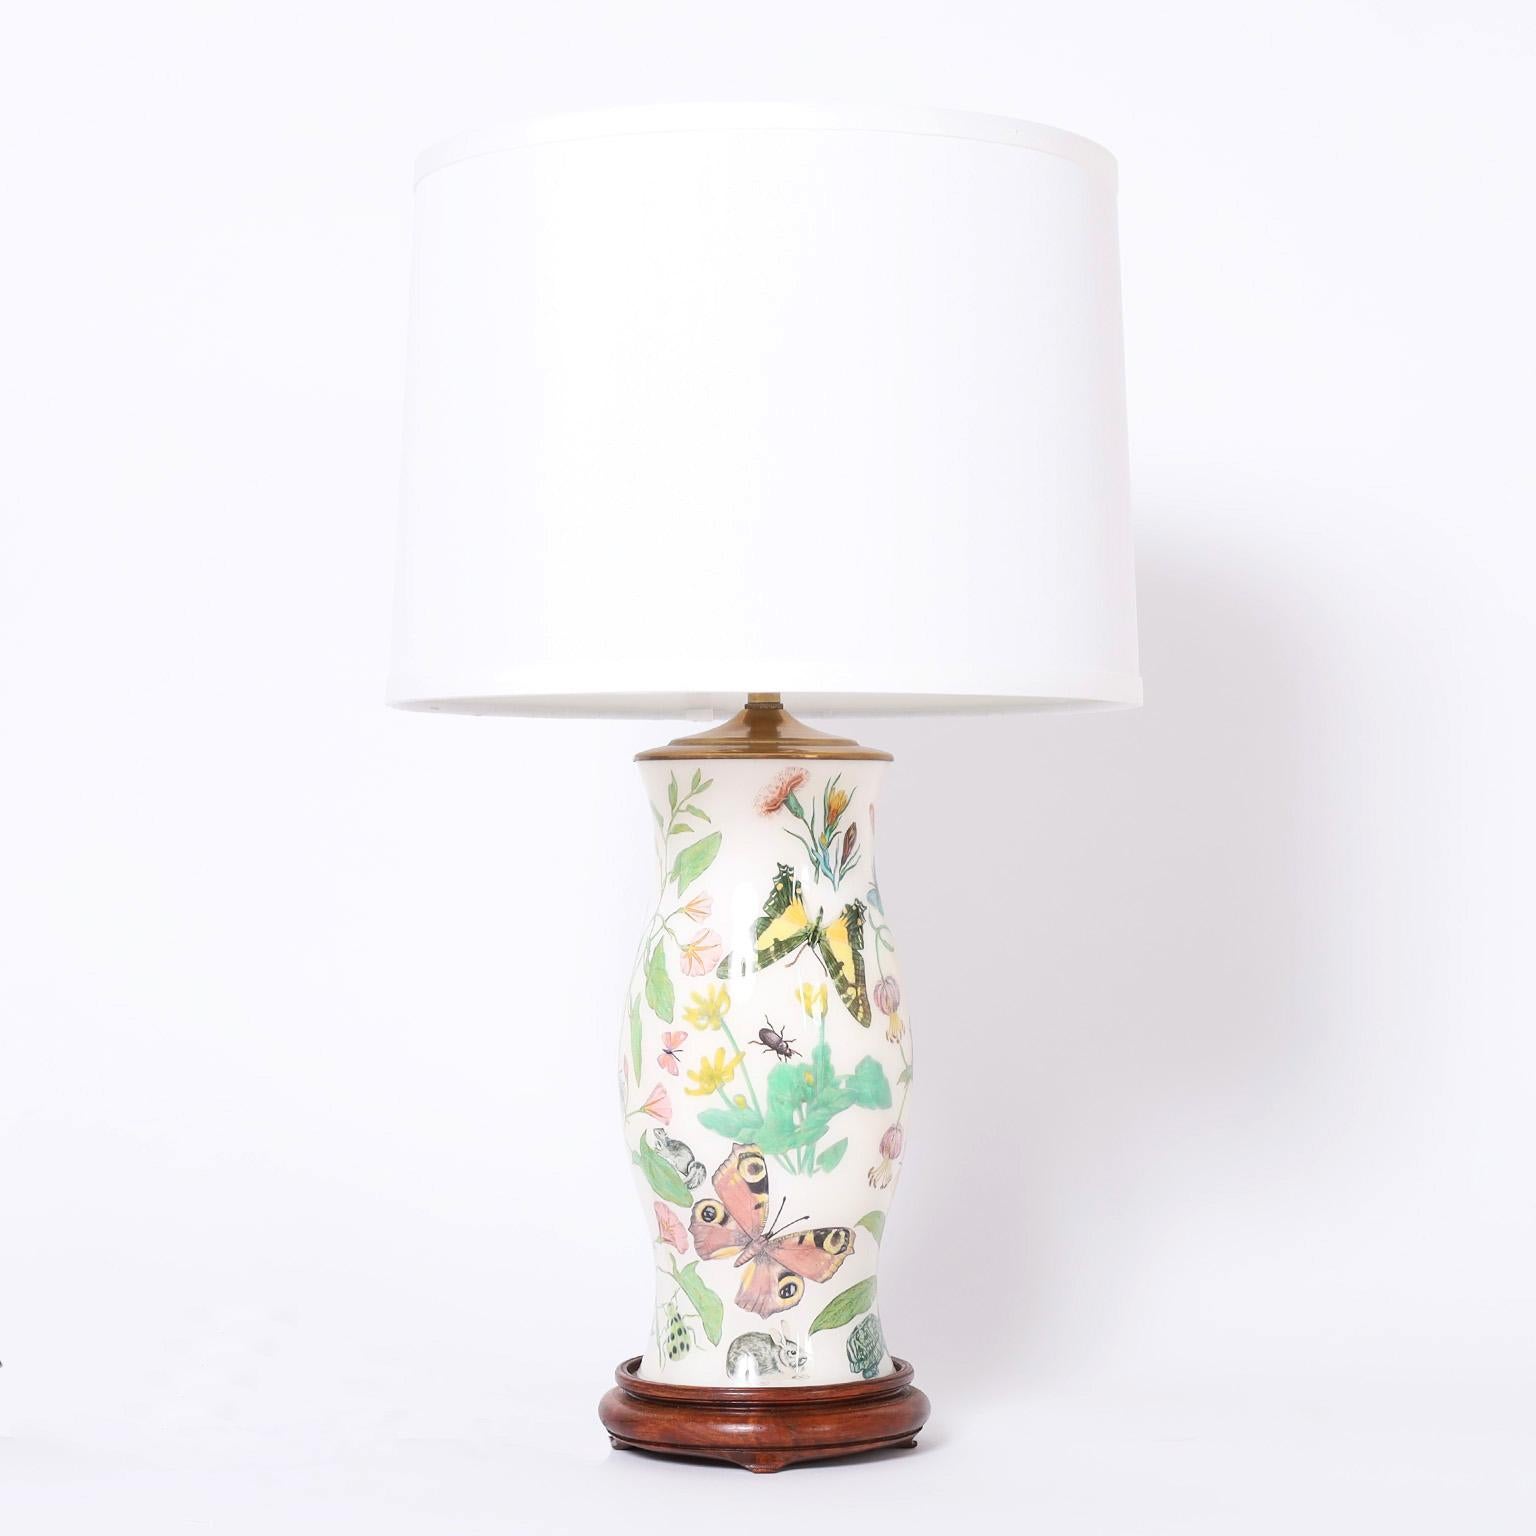 Delightful pair of table lamps with reverse decoupage flowers, butterflies, and bugs on a white background with classic form on wood bases.